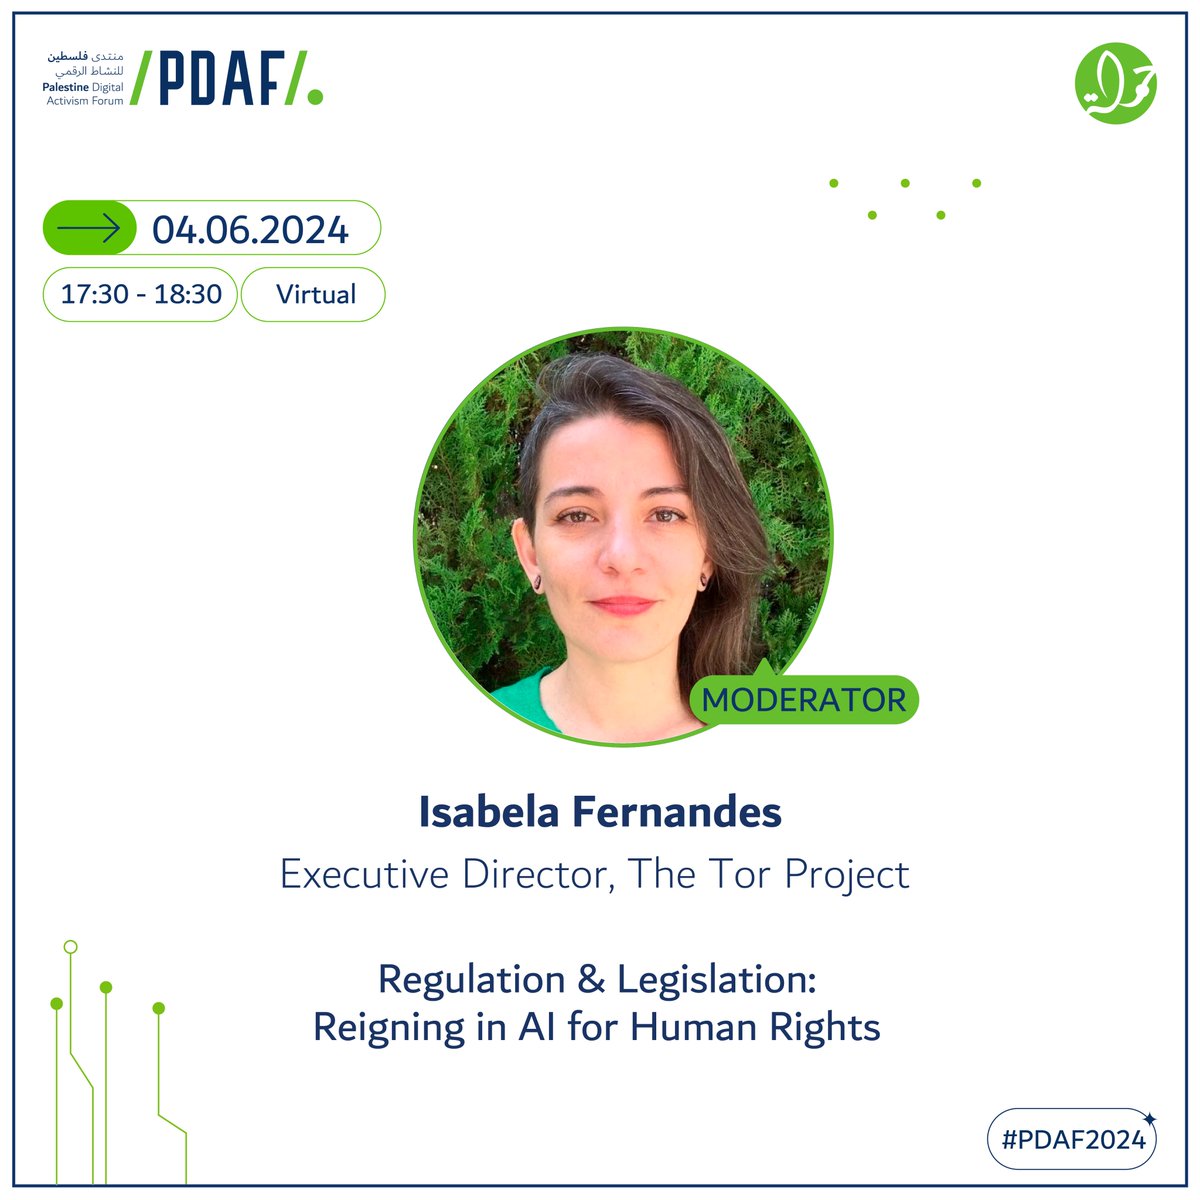 📢Join Isabela Fernandes, who will moderate the session: “Regulation & Legislation: Reigning in AI for Human Rights” @torproject Reserve your seat now: pdaf.net #PDAF2024